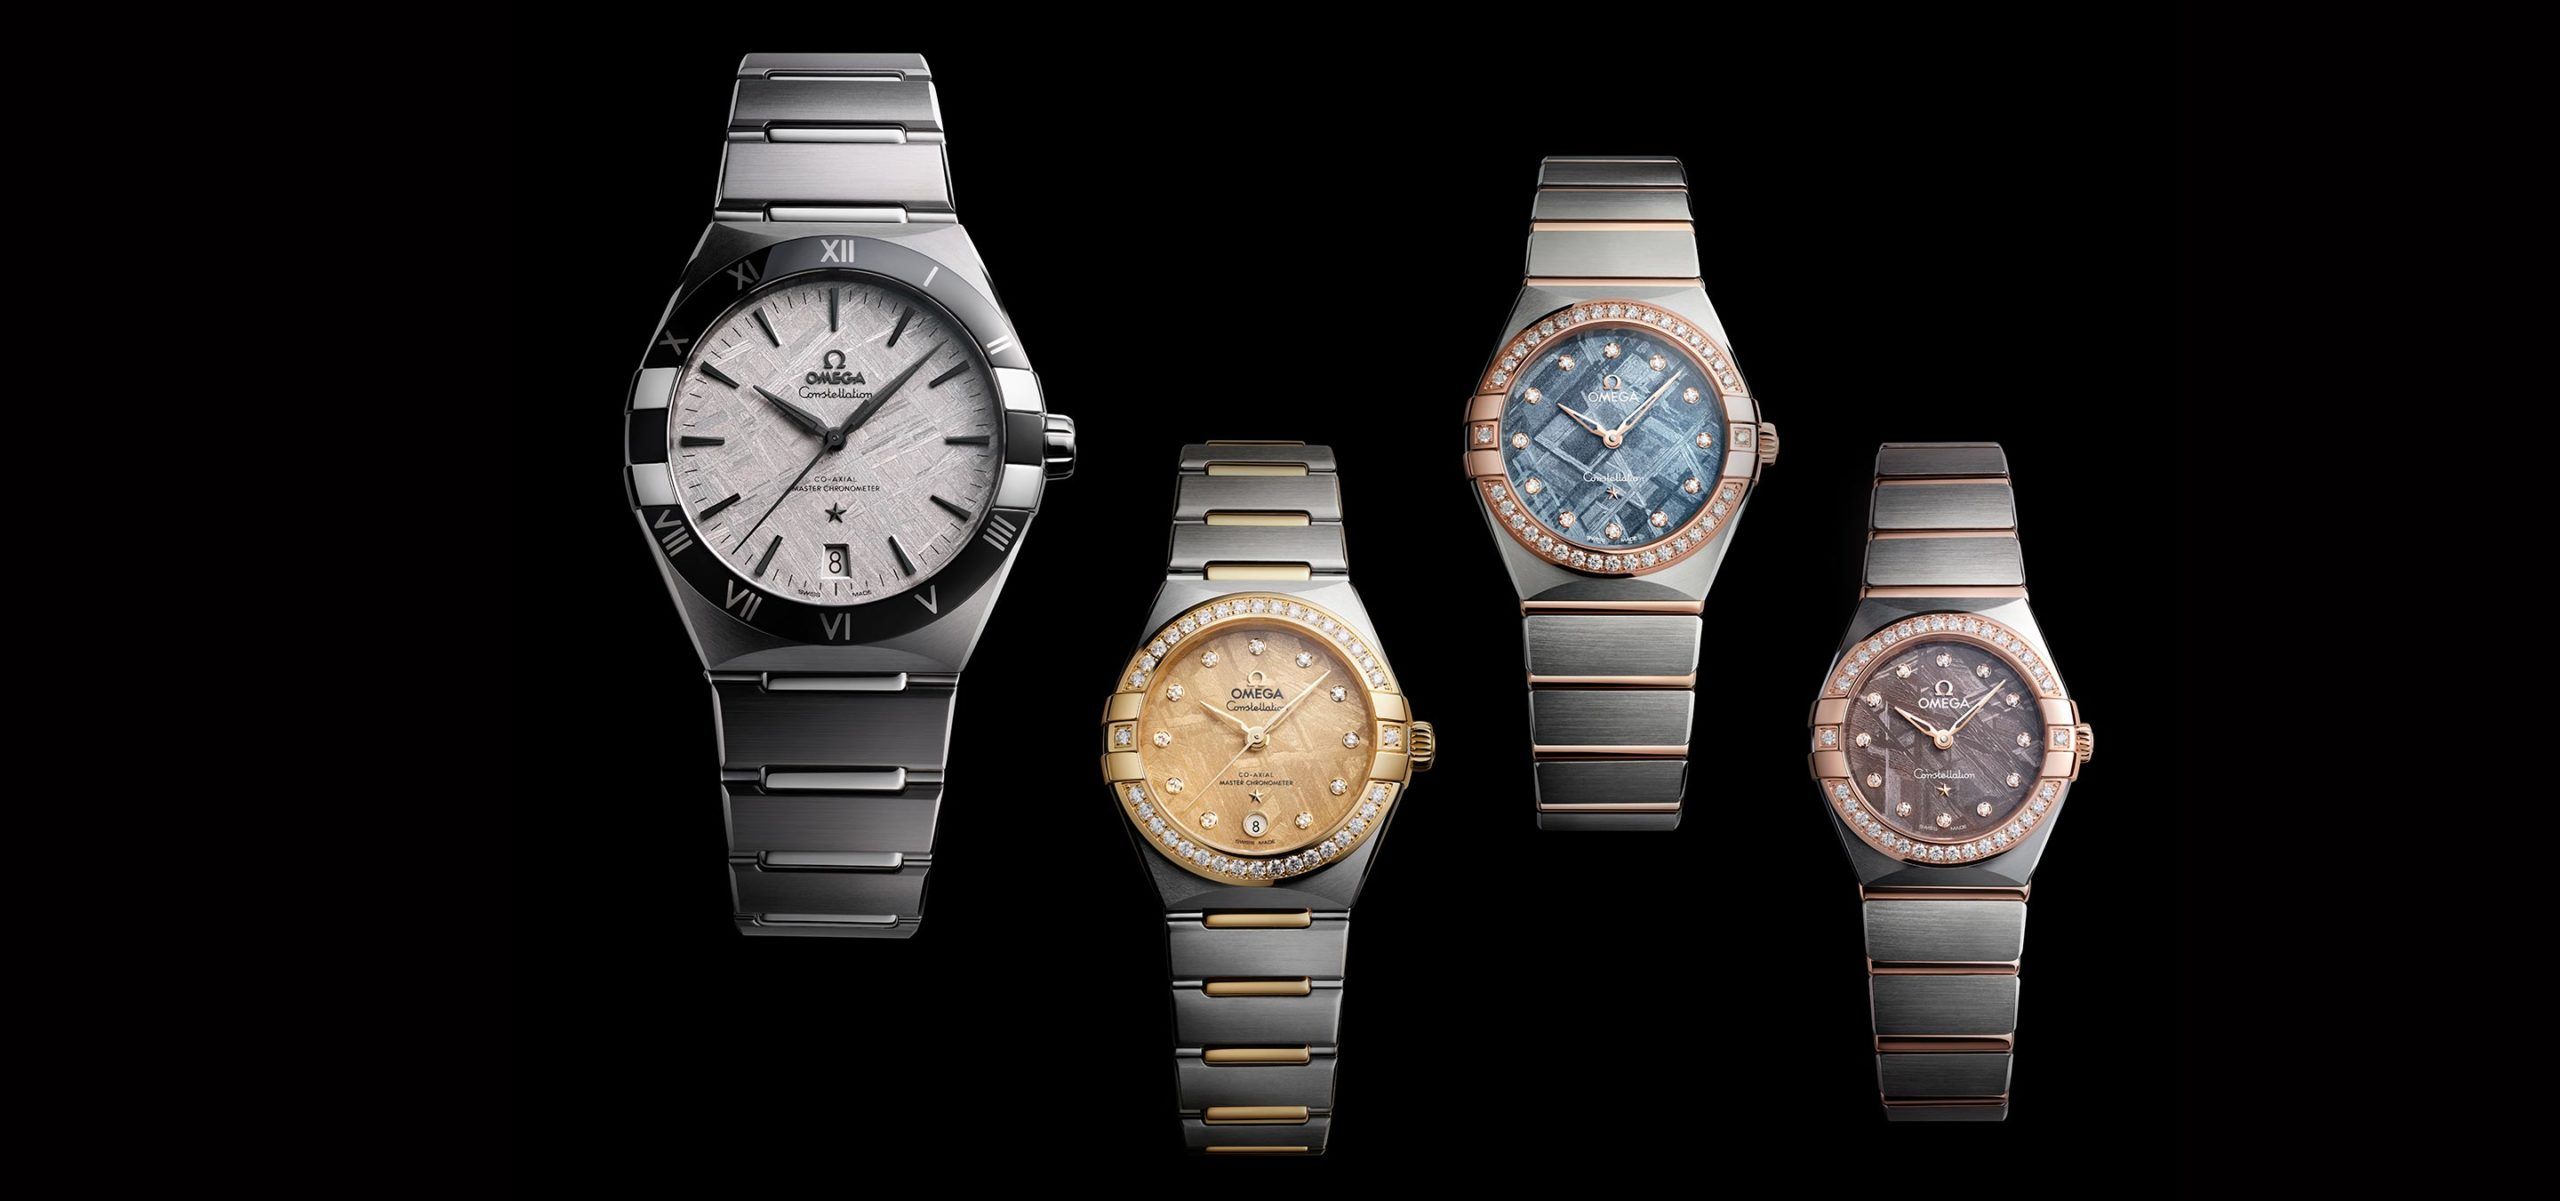 Starry-Eyed Surprise: Omega’s Constellation Collection Introduces Colourful Meteorite Dials